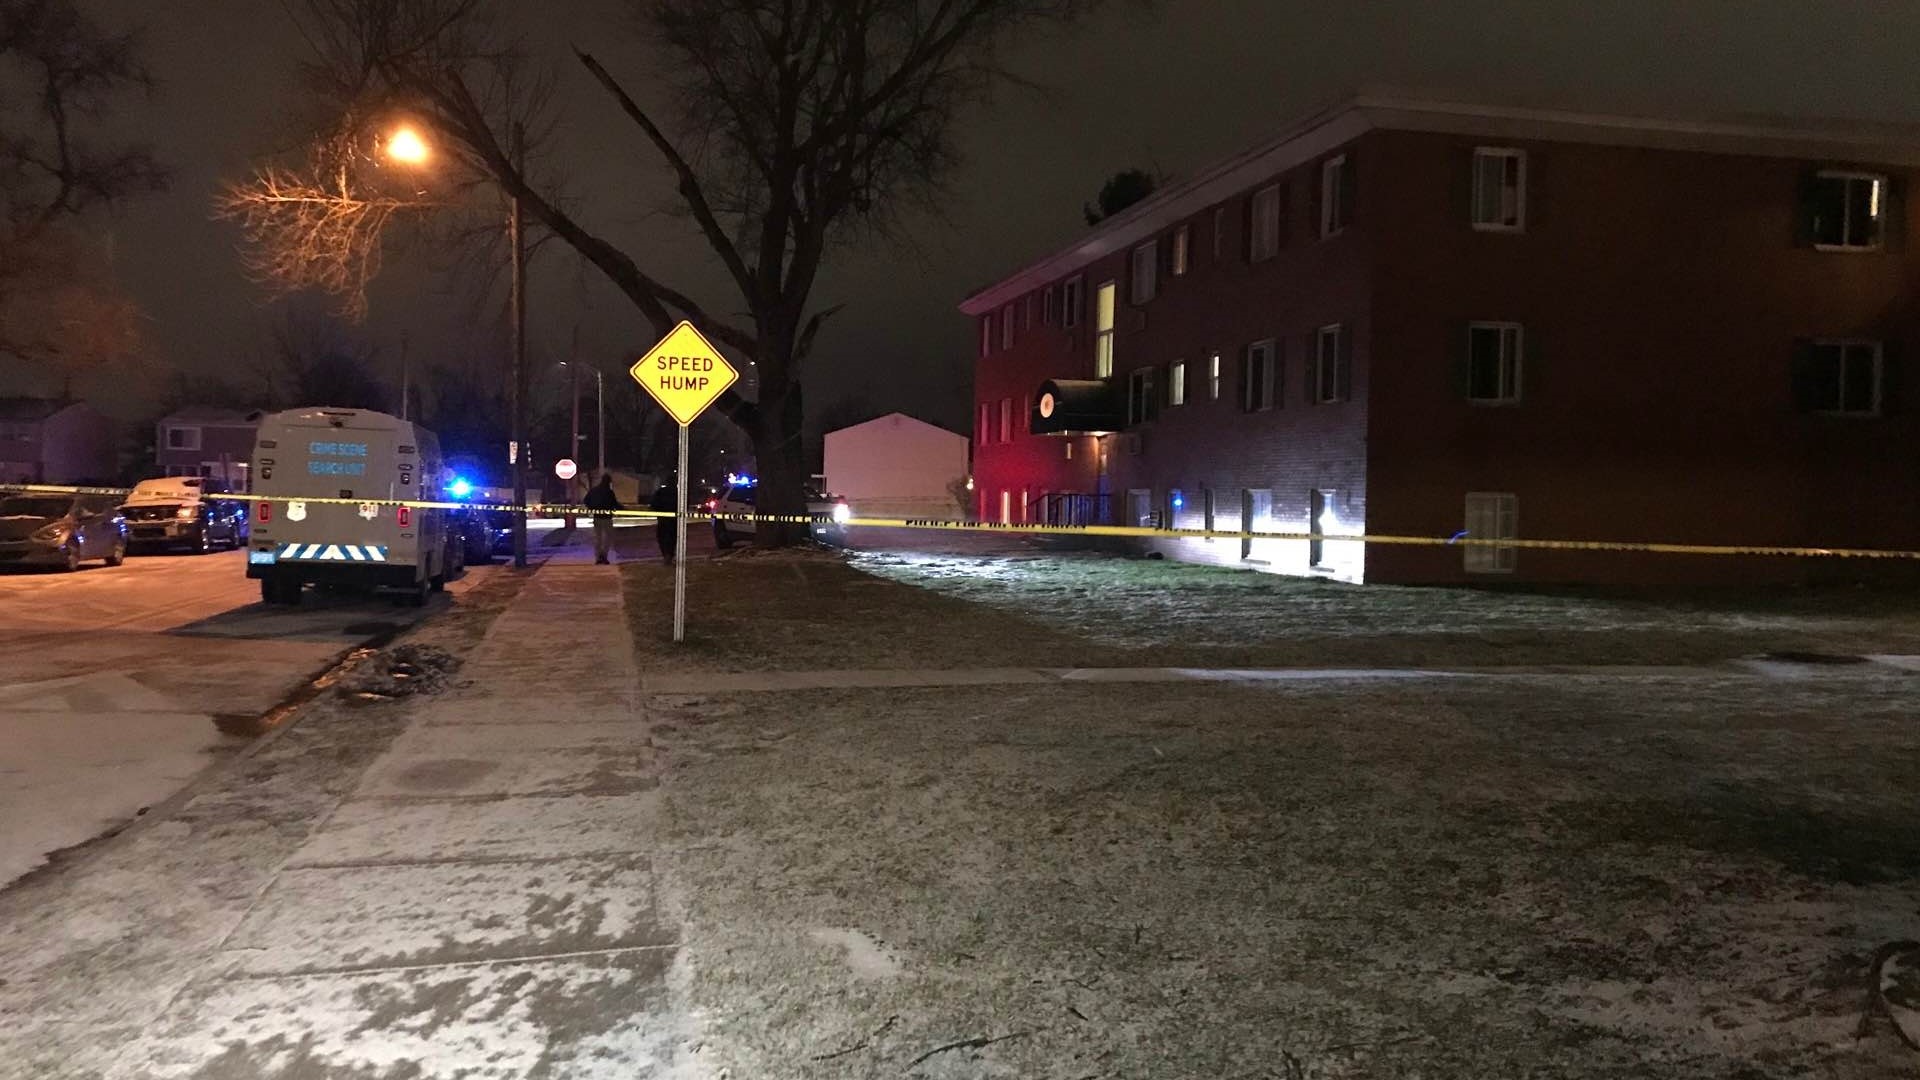 Police said the shooting happened just after 9 p.m. in the 800 block of Wedgewood Drive.